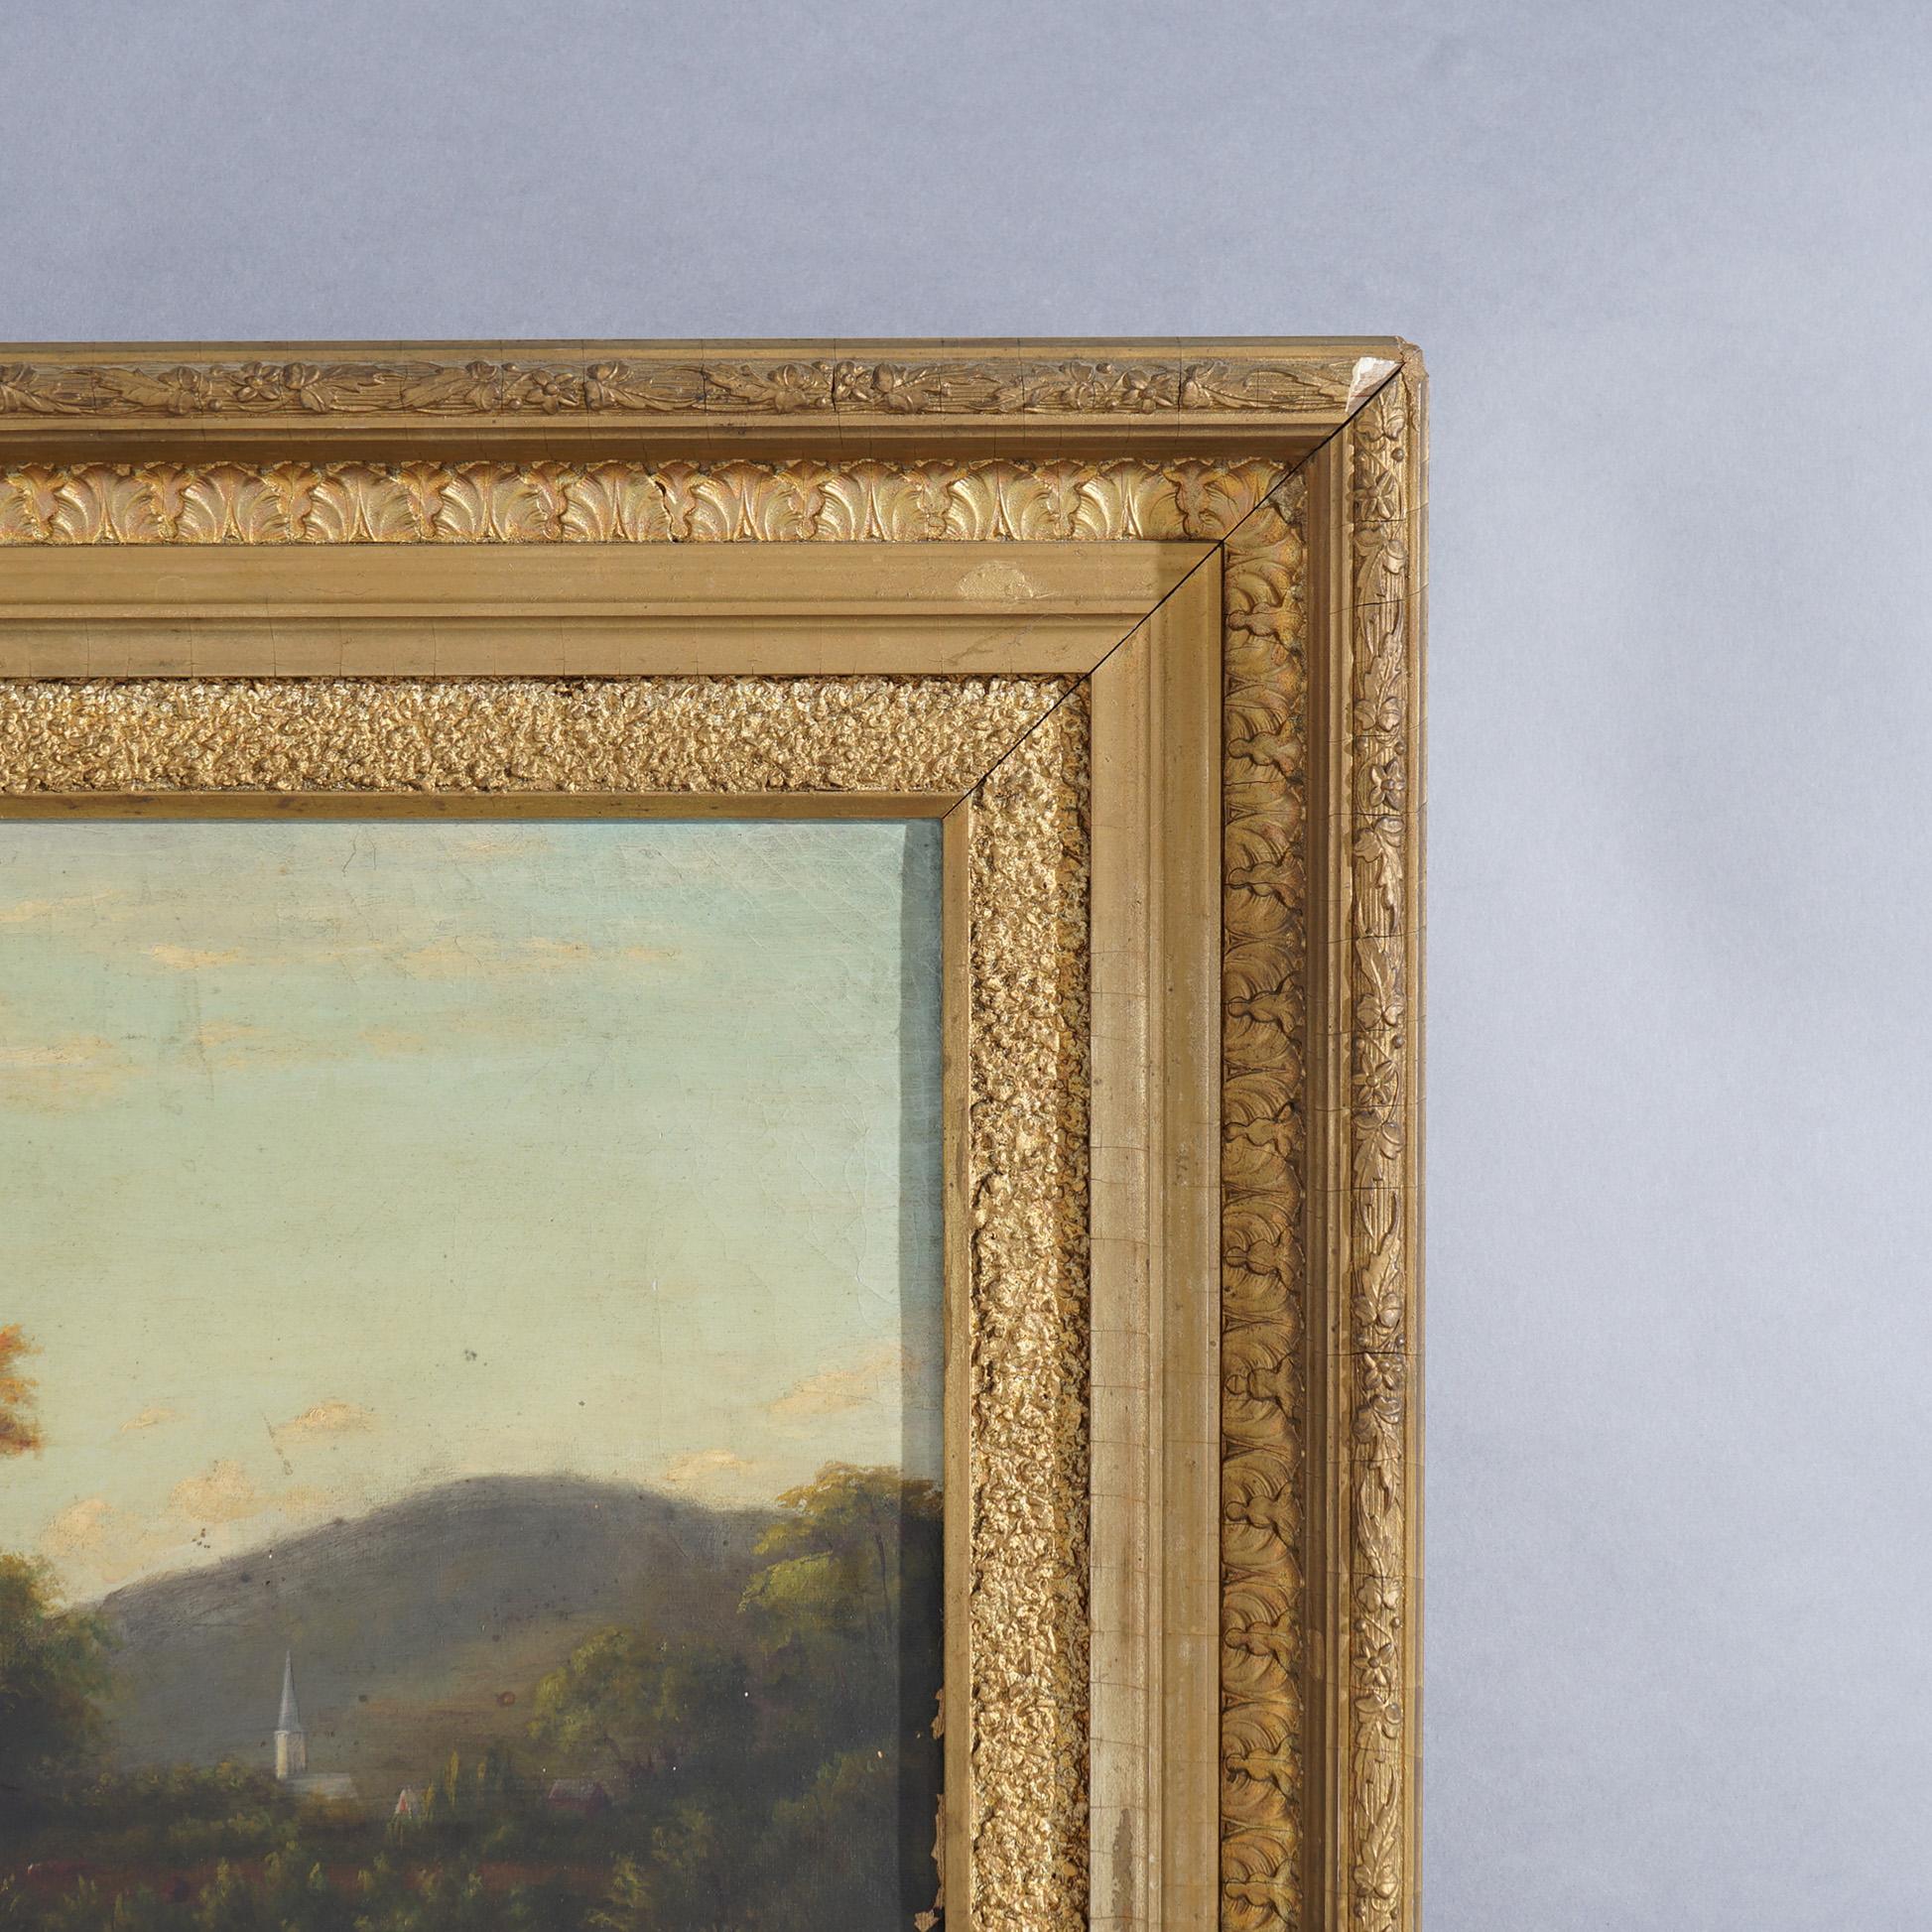 Hand-Painted Antique Hudson River School Landscape Painting with Cattle, Stream and Church